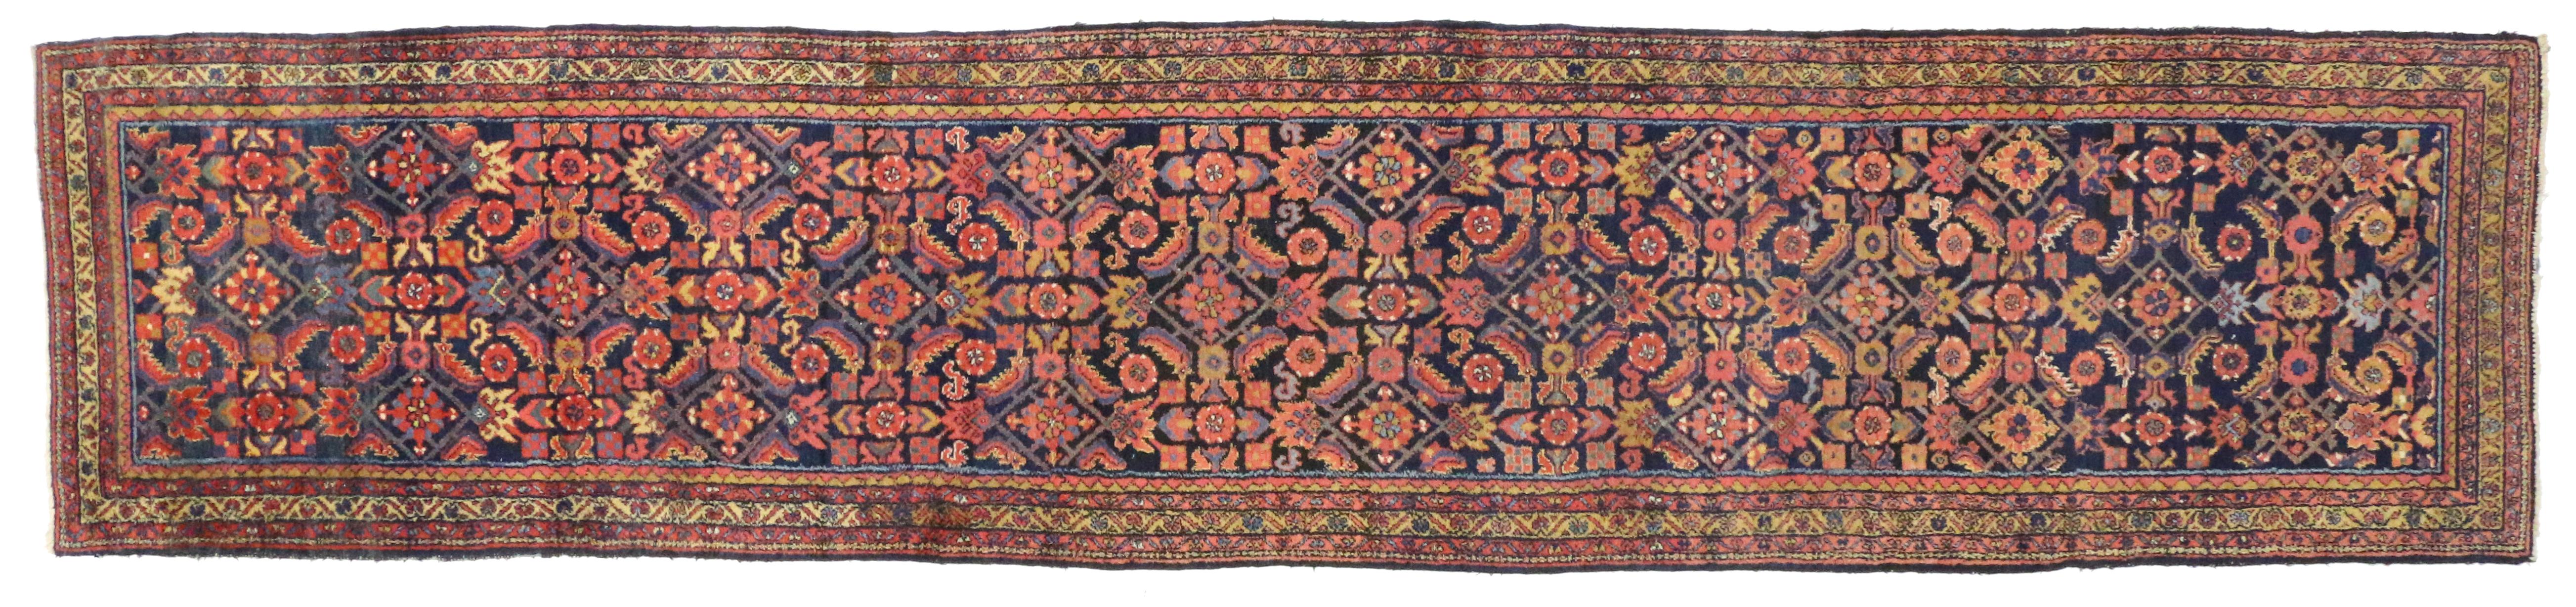 Antique Persian Malayer Runner with Modern Victorian Style For Sale 6